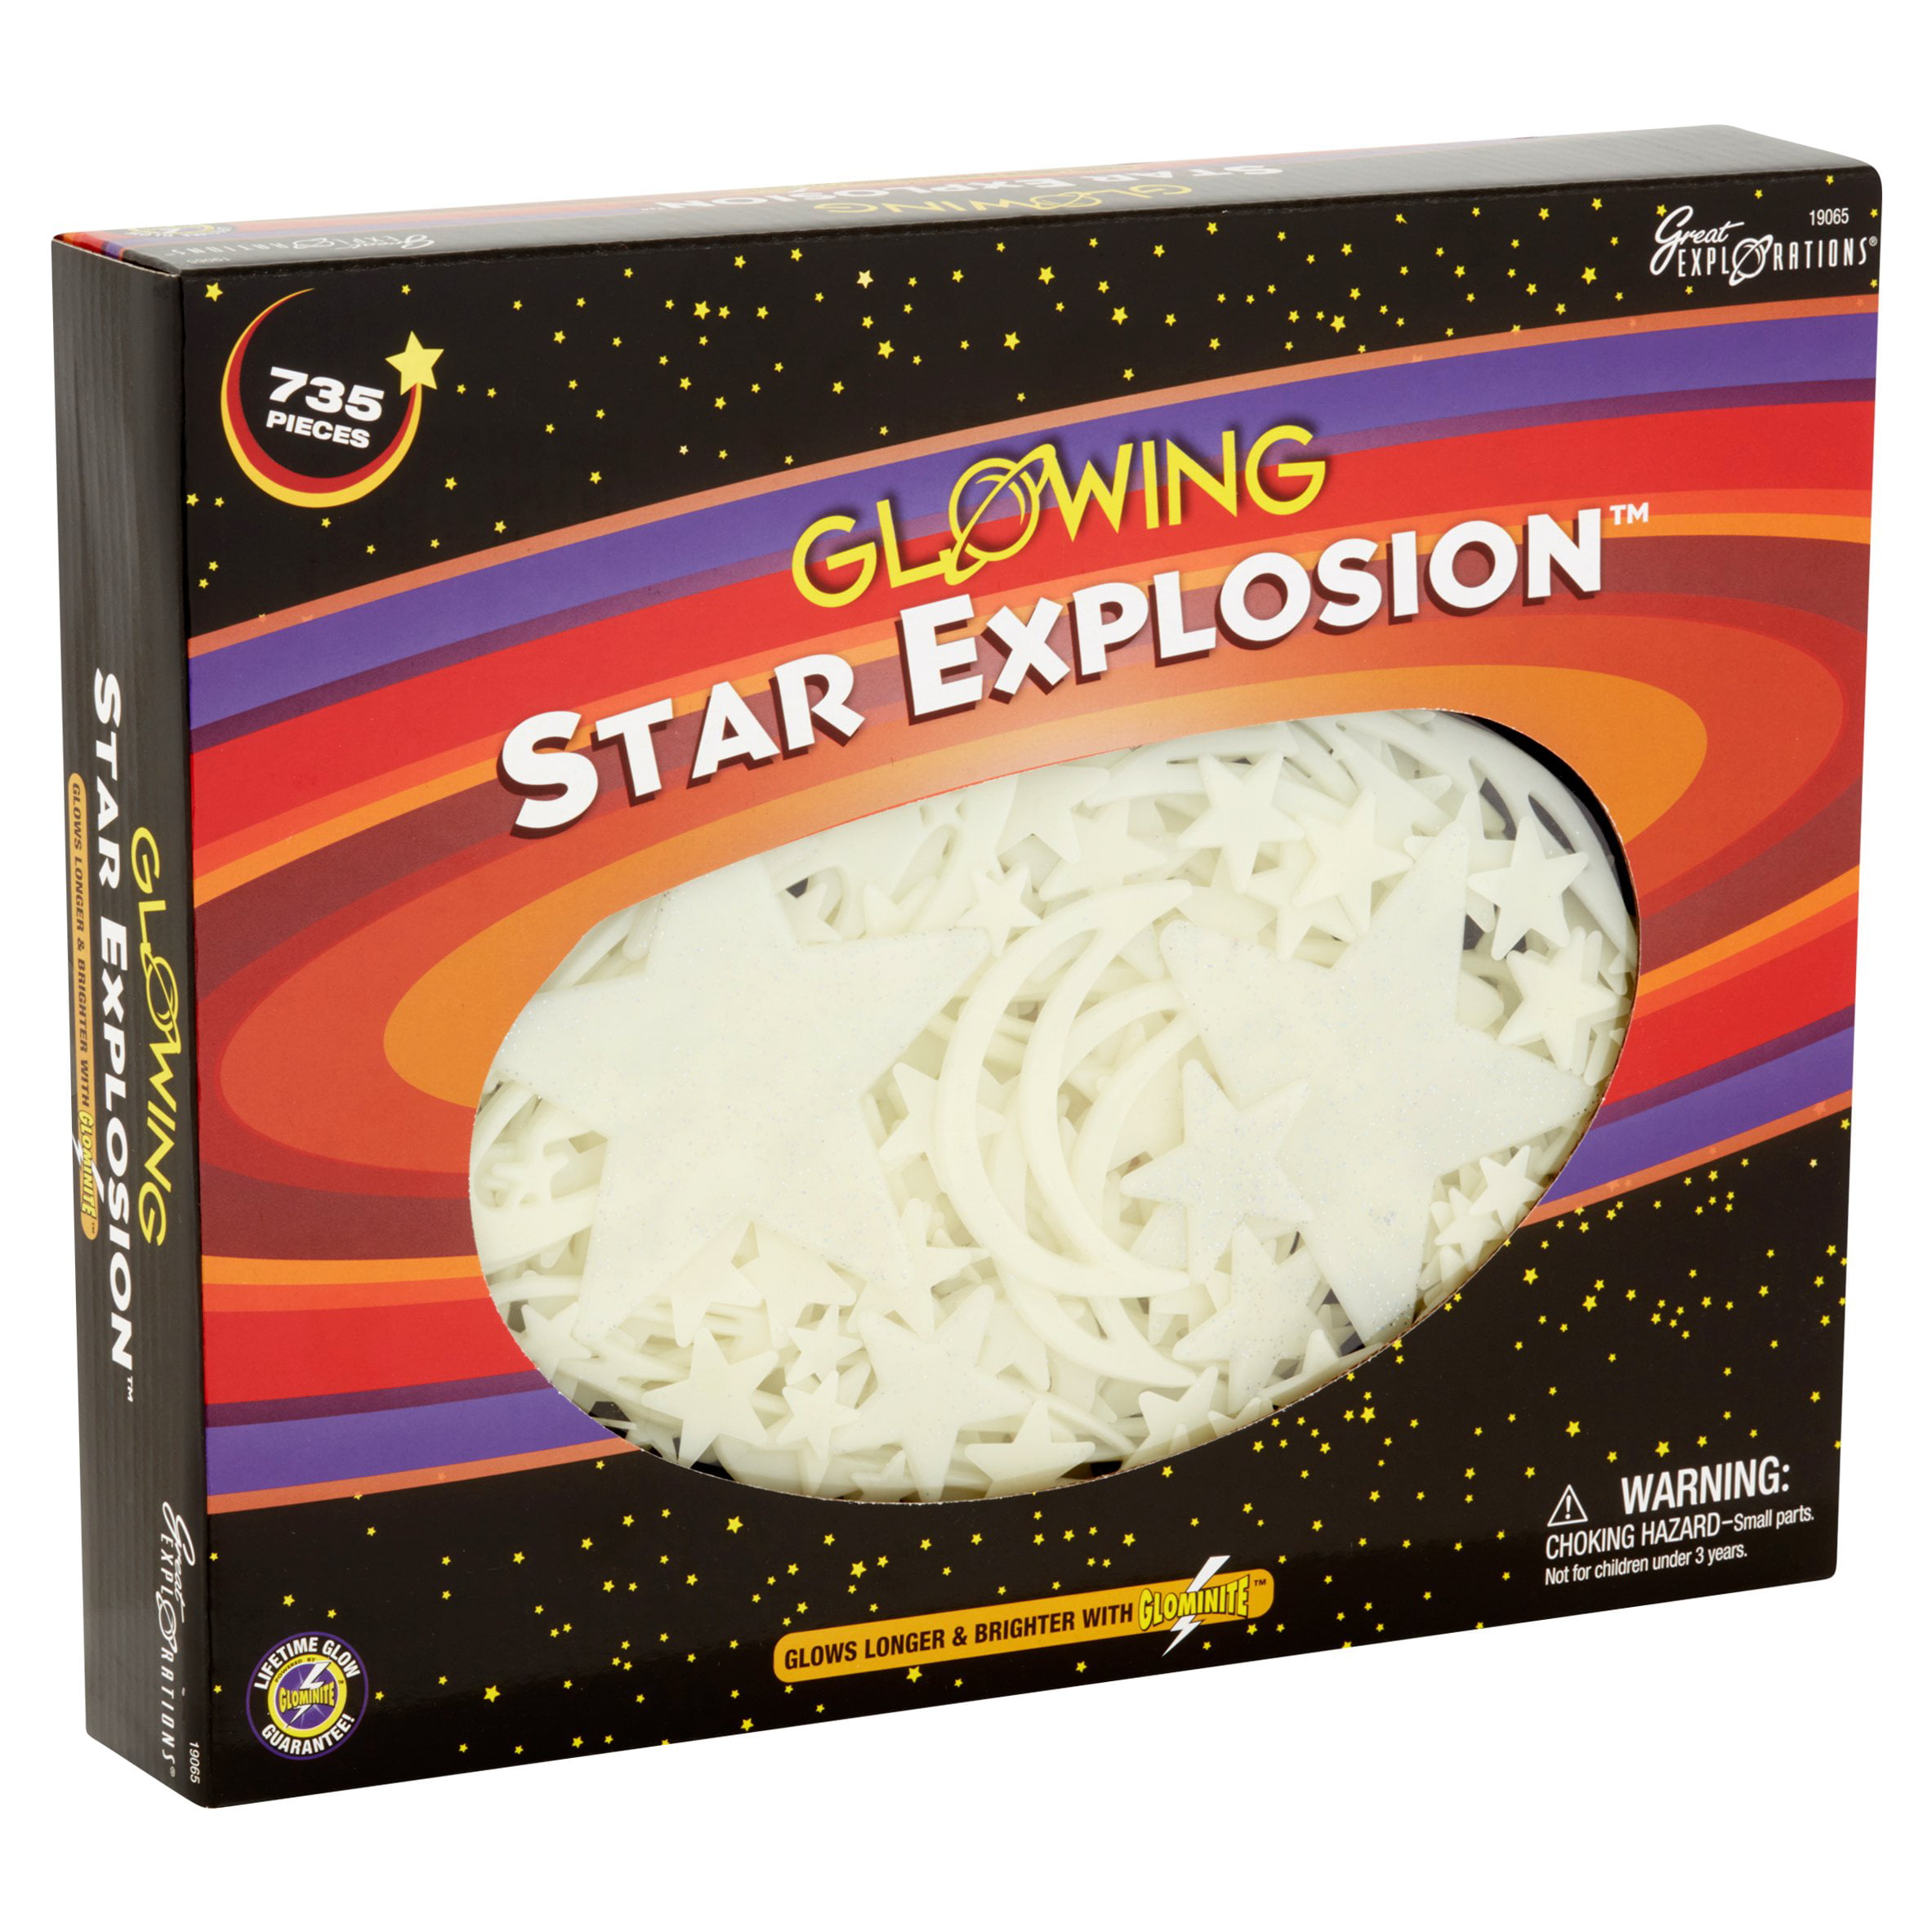 Great Explorations Glowing Star Explosion 735 Count Walmart Com